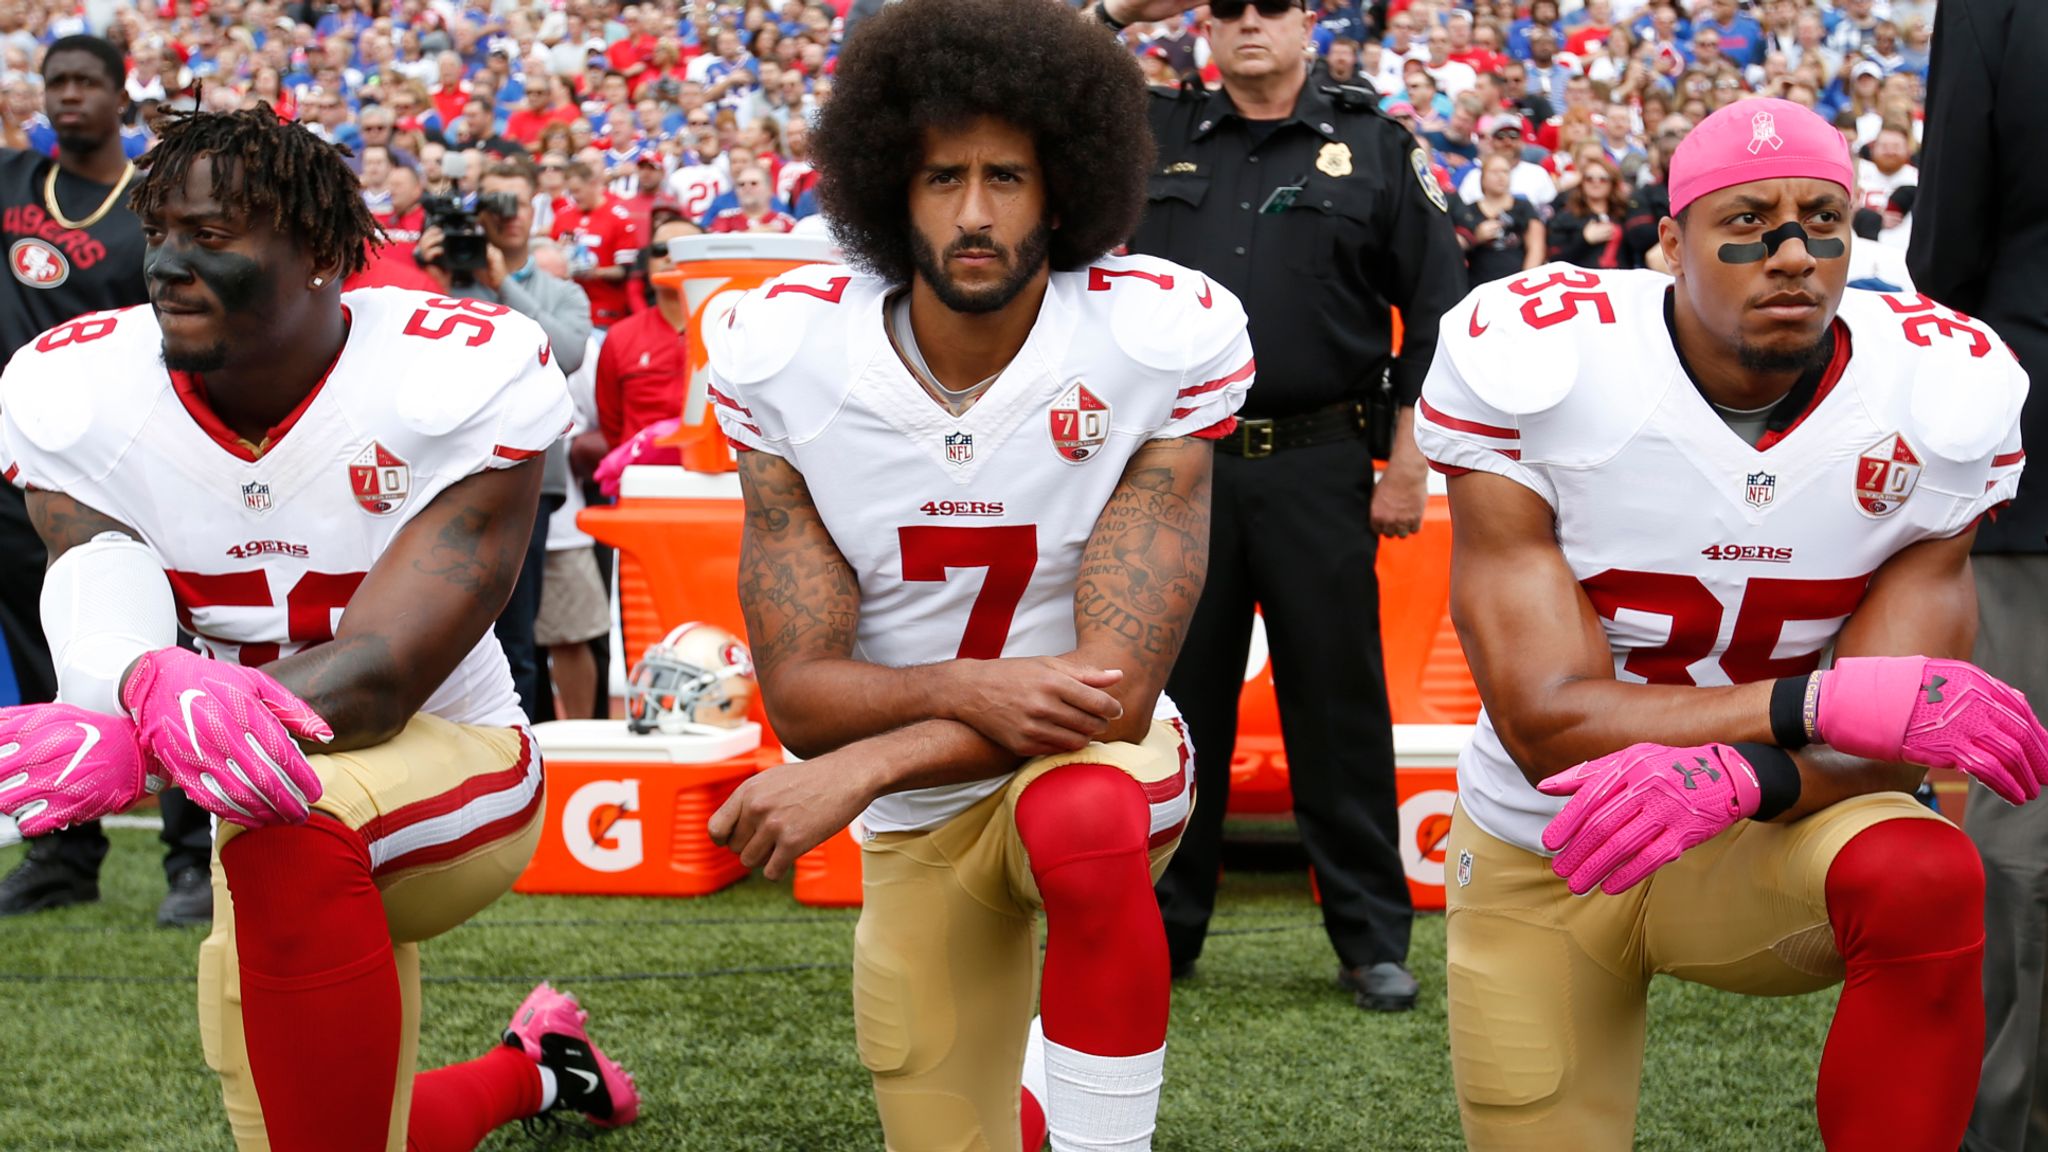 NFL apologizes for 'not listening' to players about racism as